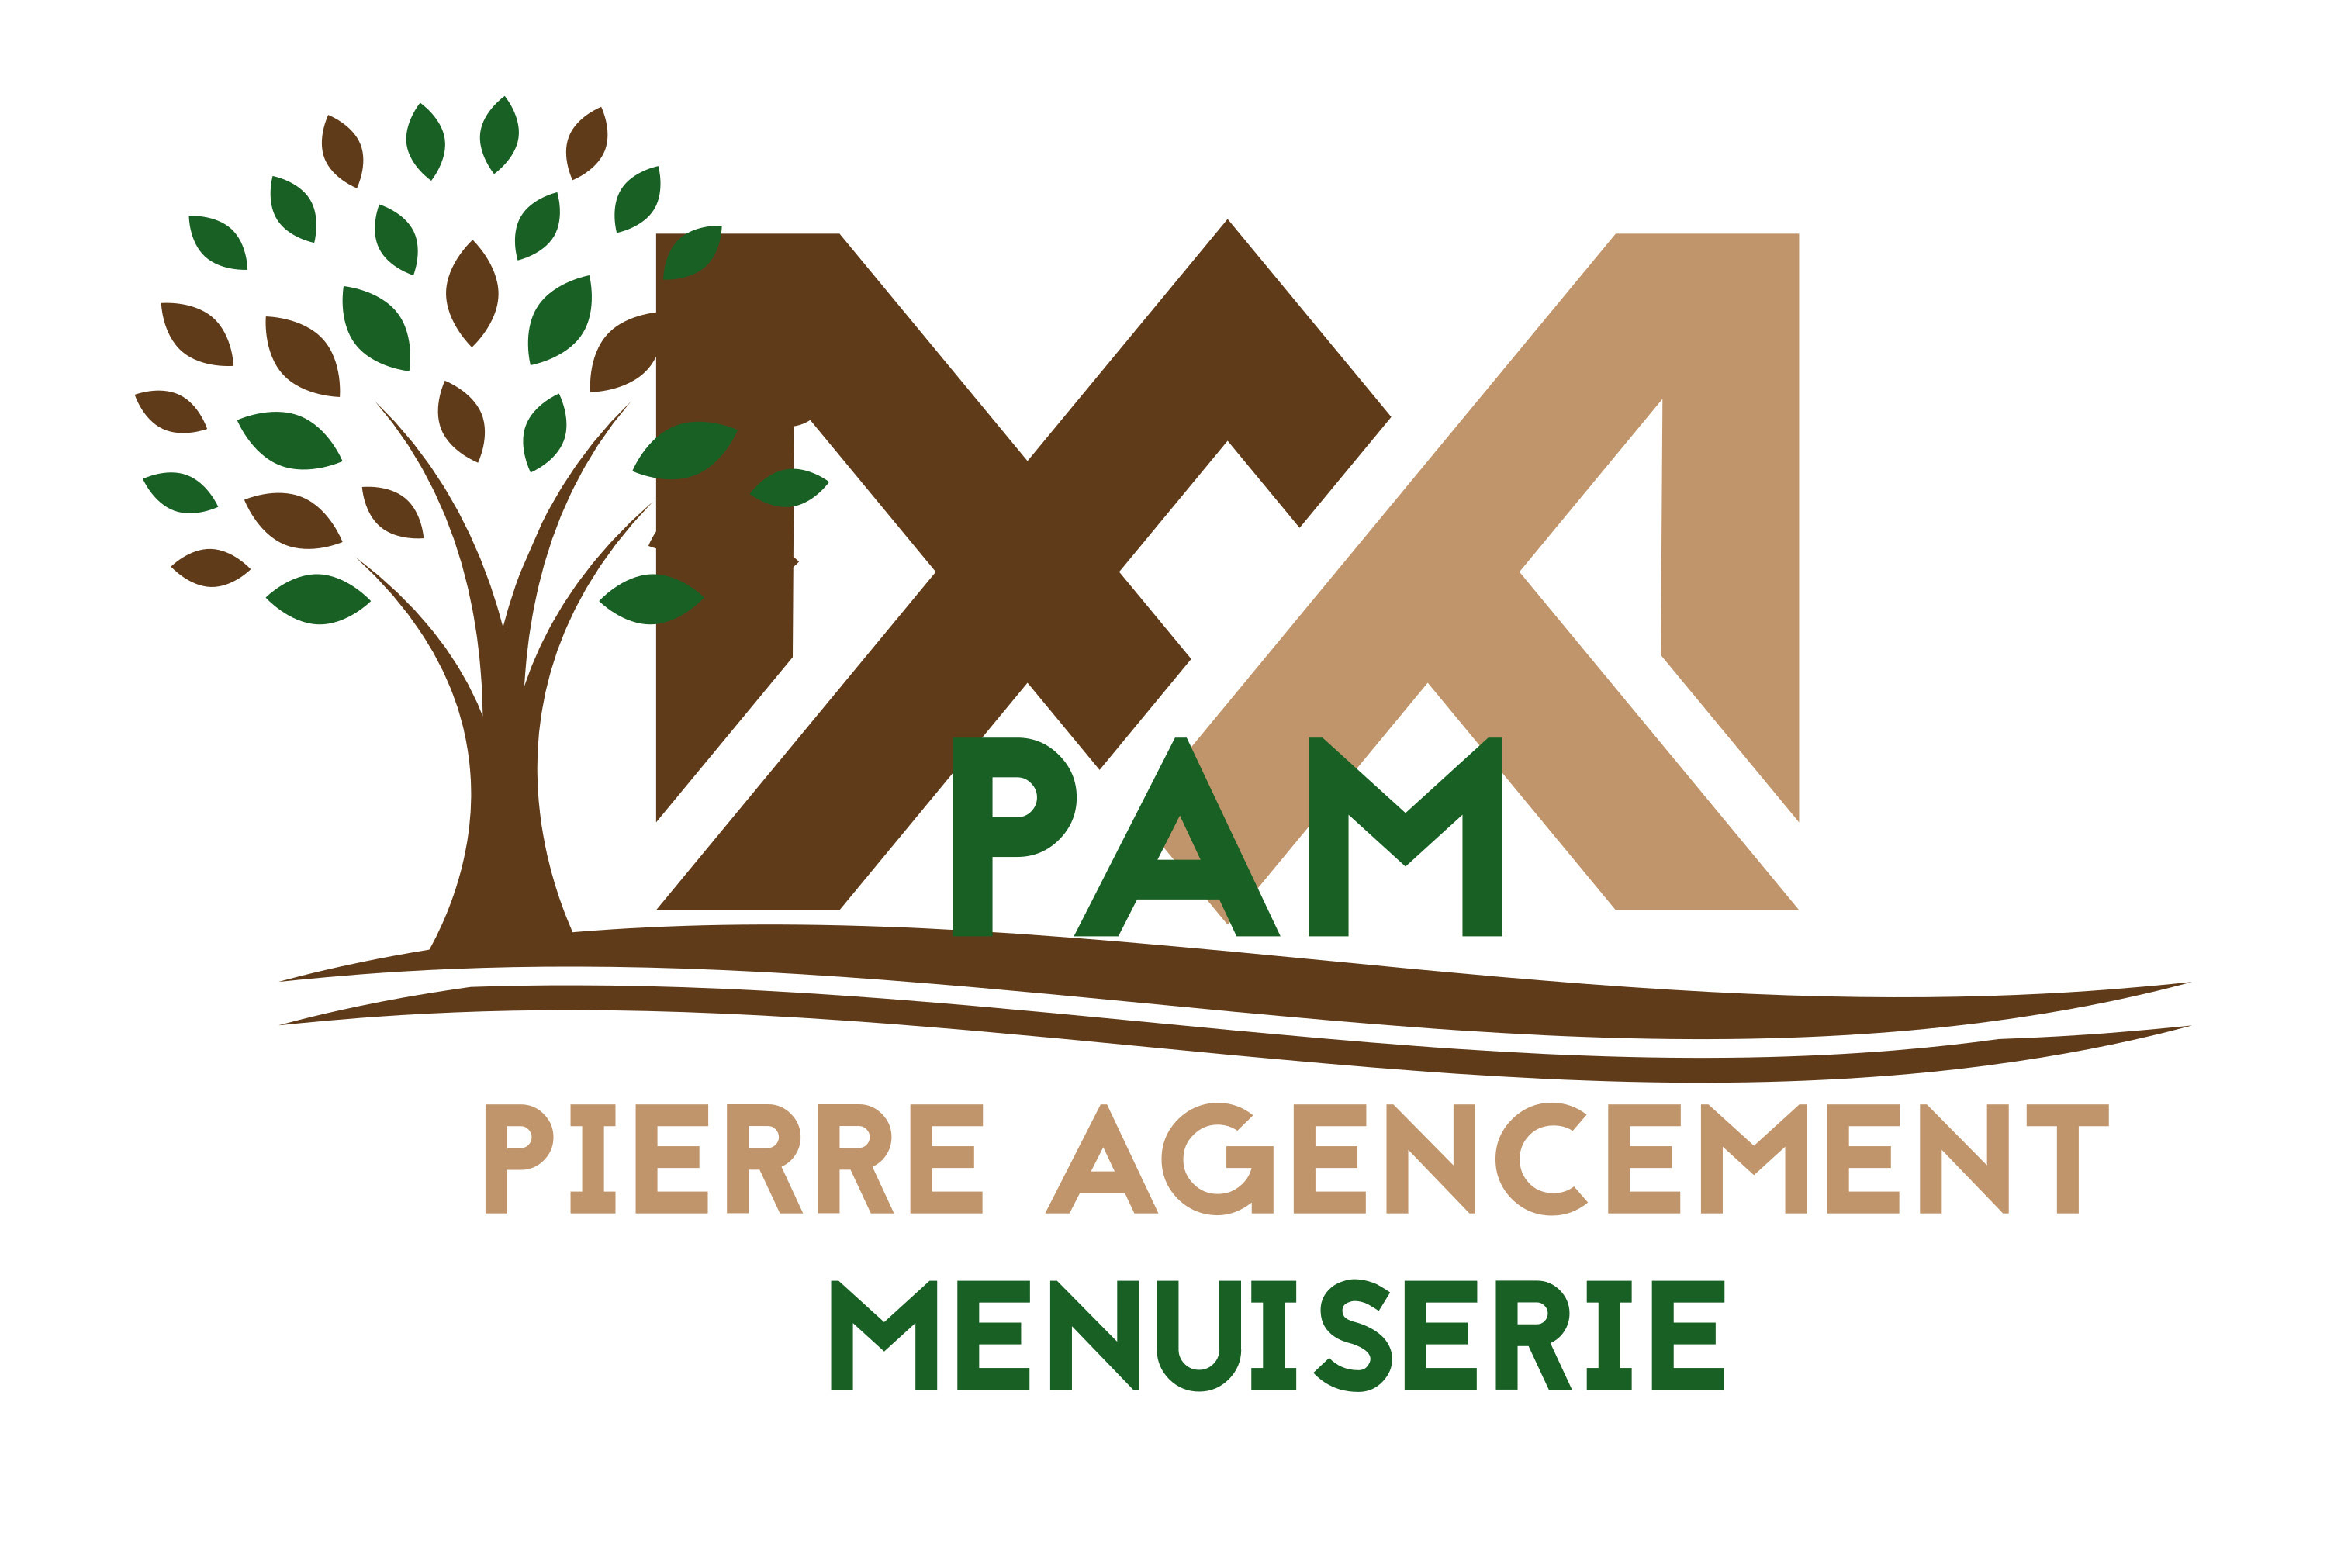 Pierre Agencement Menuiserie - PAM